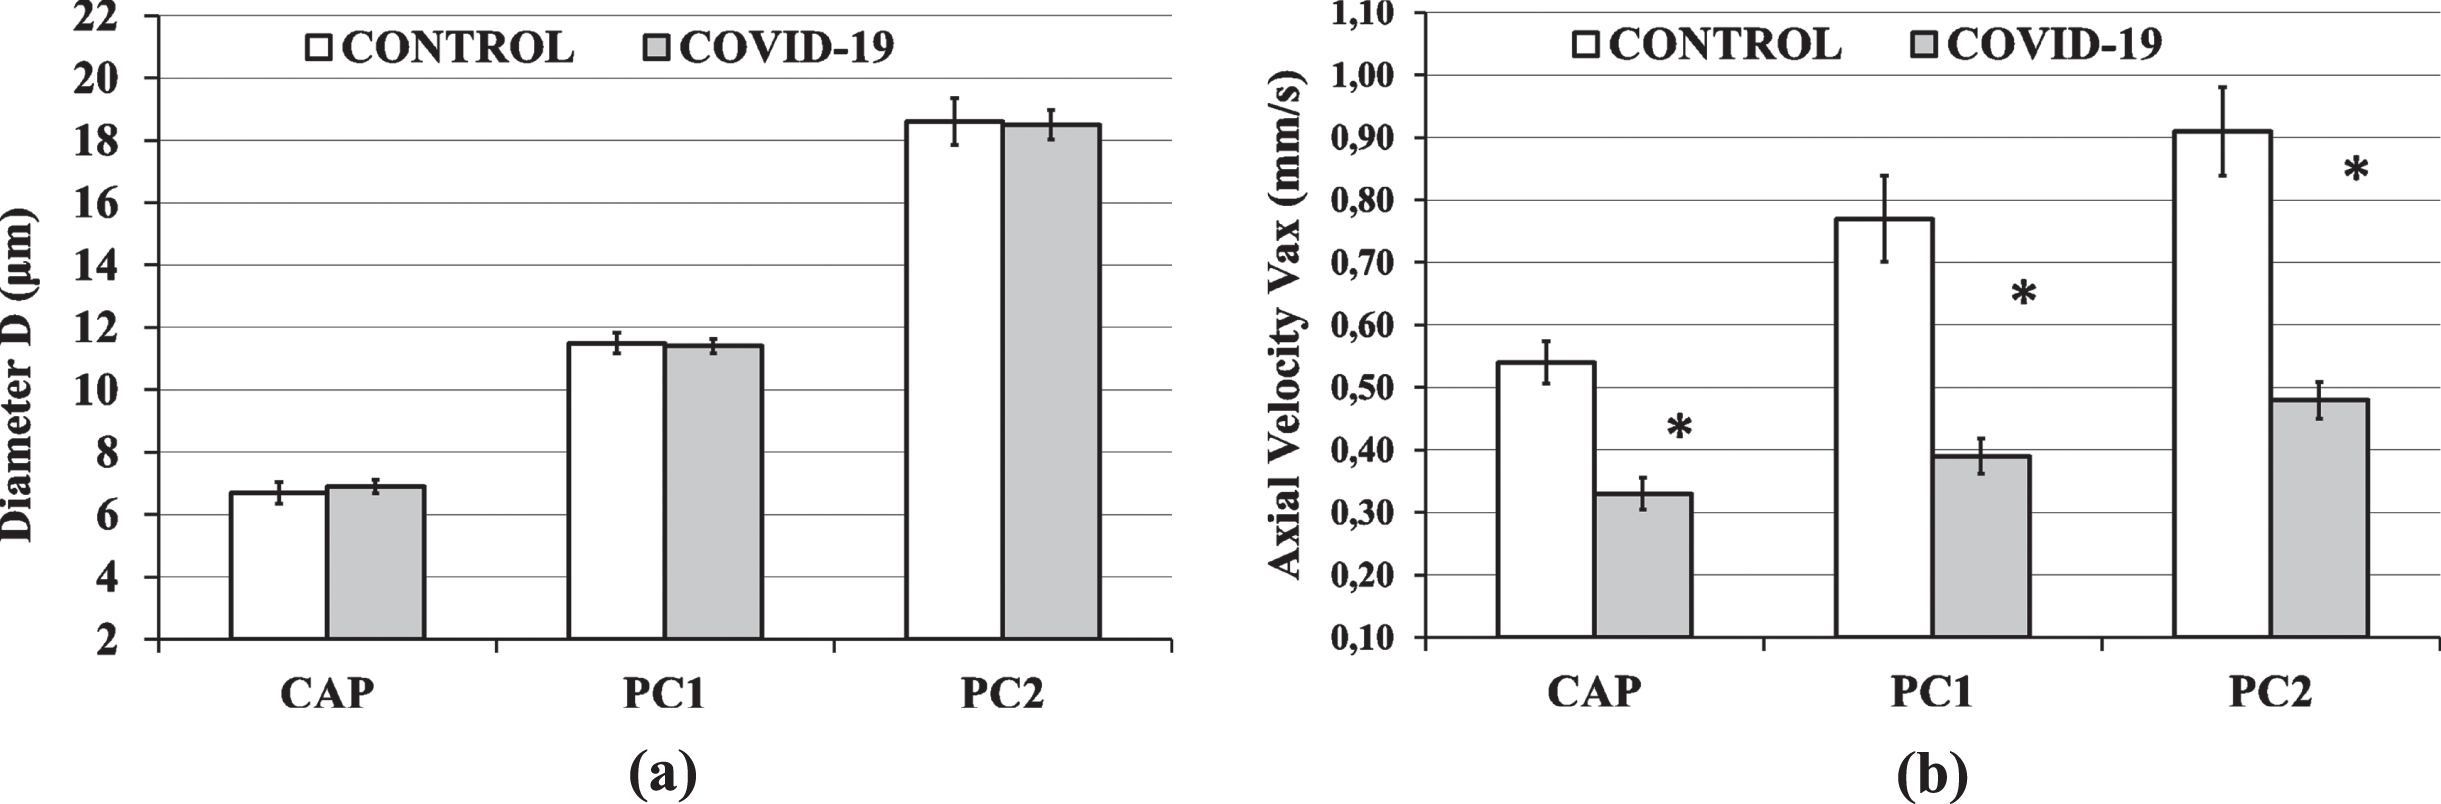 The Control Group and COVID-19 Group results are shown in white and gray columns, respectively. Column heights are mean values and black bars represent the 95% confidence interval of the mean. (a) There was no statistical difference in diameter D between groups, for capillaries (CAP), postcapillary venules of size 1 (PC1) and postcapillary venules of size 2 (PC2). (b) The average COVID-19 Group axial velocity (Vax) was 39%, 47% and 49% lower than the average Control Group Vax, in the capillaries (CAP), postcapillary venules of size 1 (PC1) and postcapillary venules of size 2 (PC2), respectively (*P < 0.001).